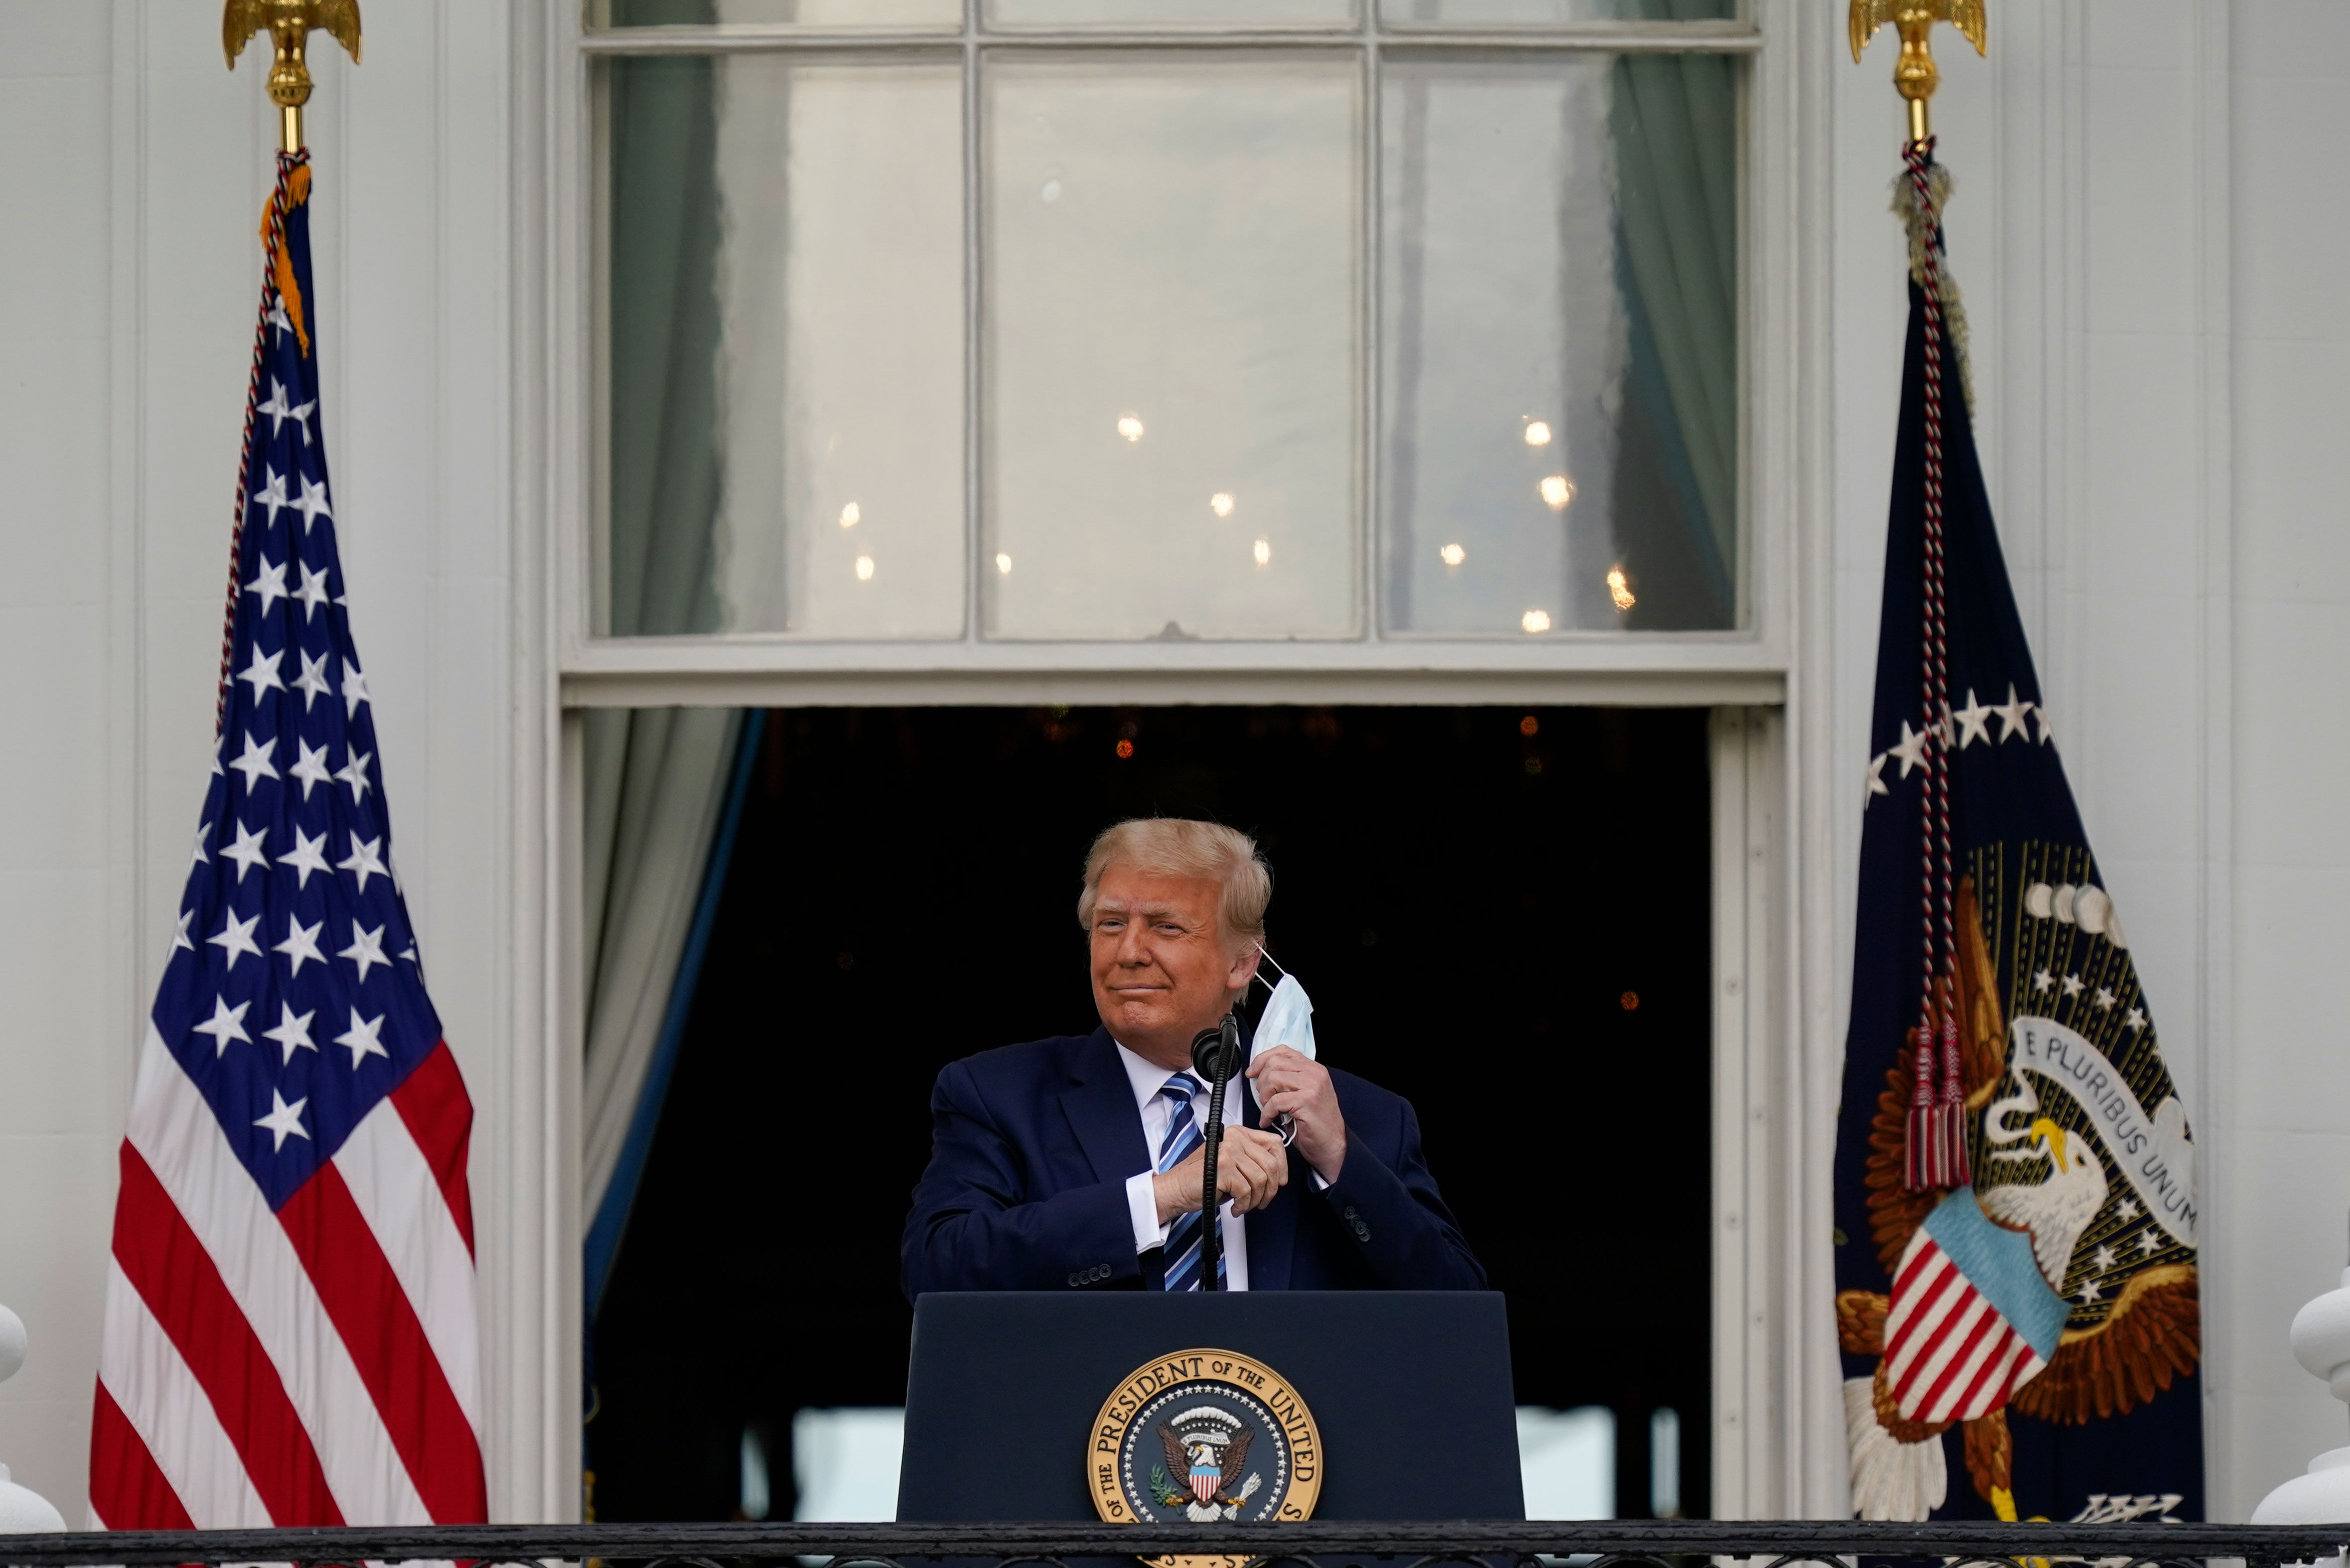 President Donald Trump removes his face mask before speaking to supporters at the White House on October 10.